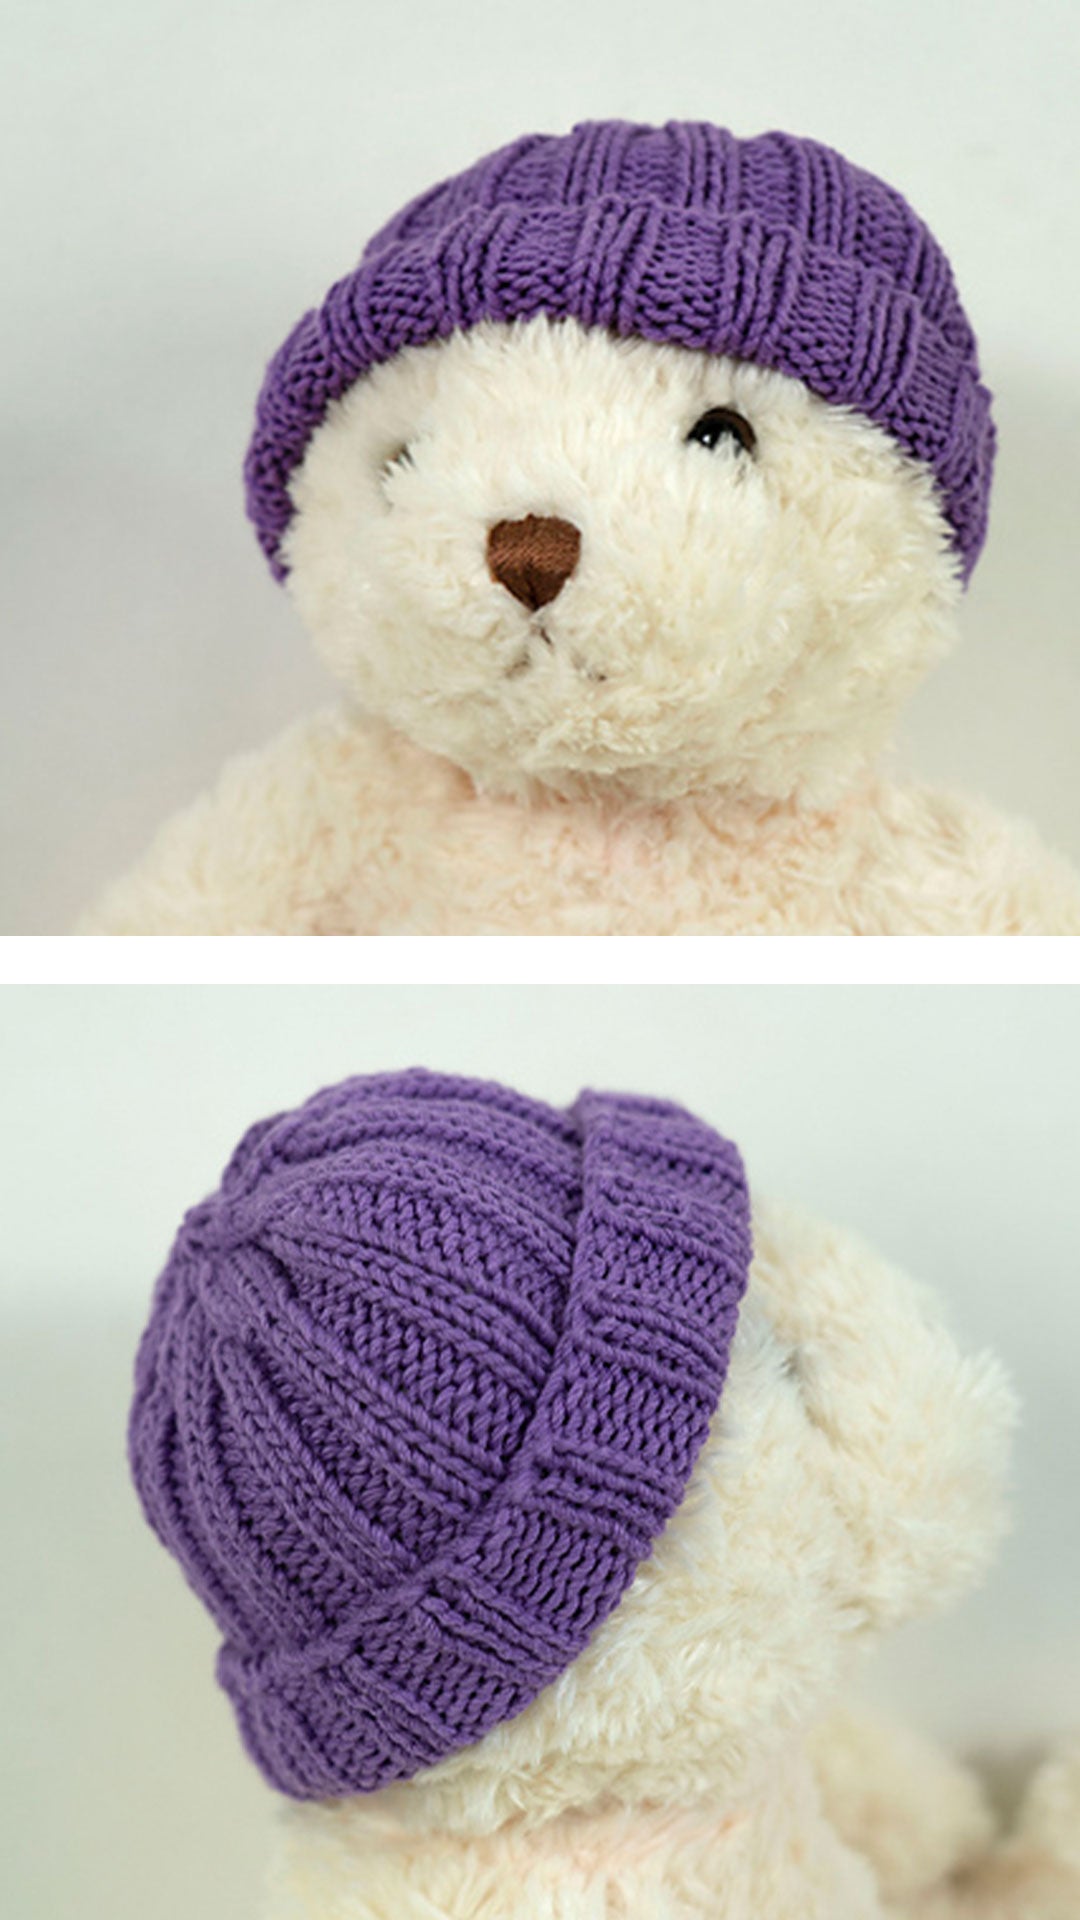 The Nifty Ribbed Hat by Shannon Dunbabin knit out of Cascade's Nifty Cotton yarn. Modeled on a teddy bear.